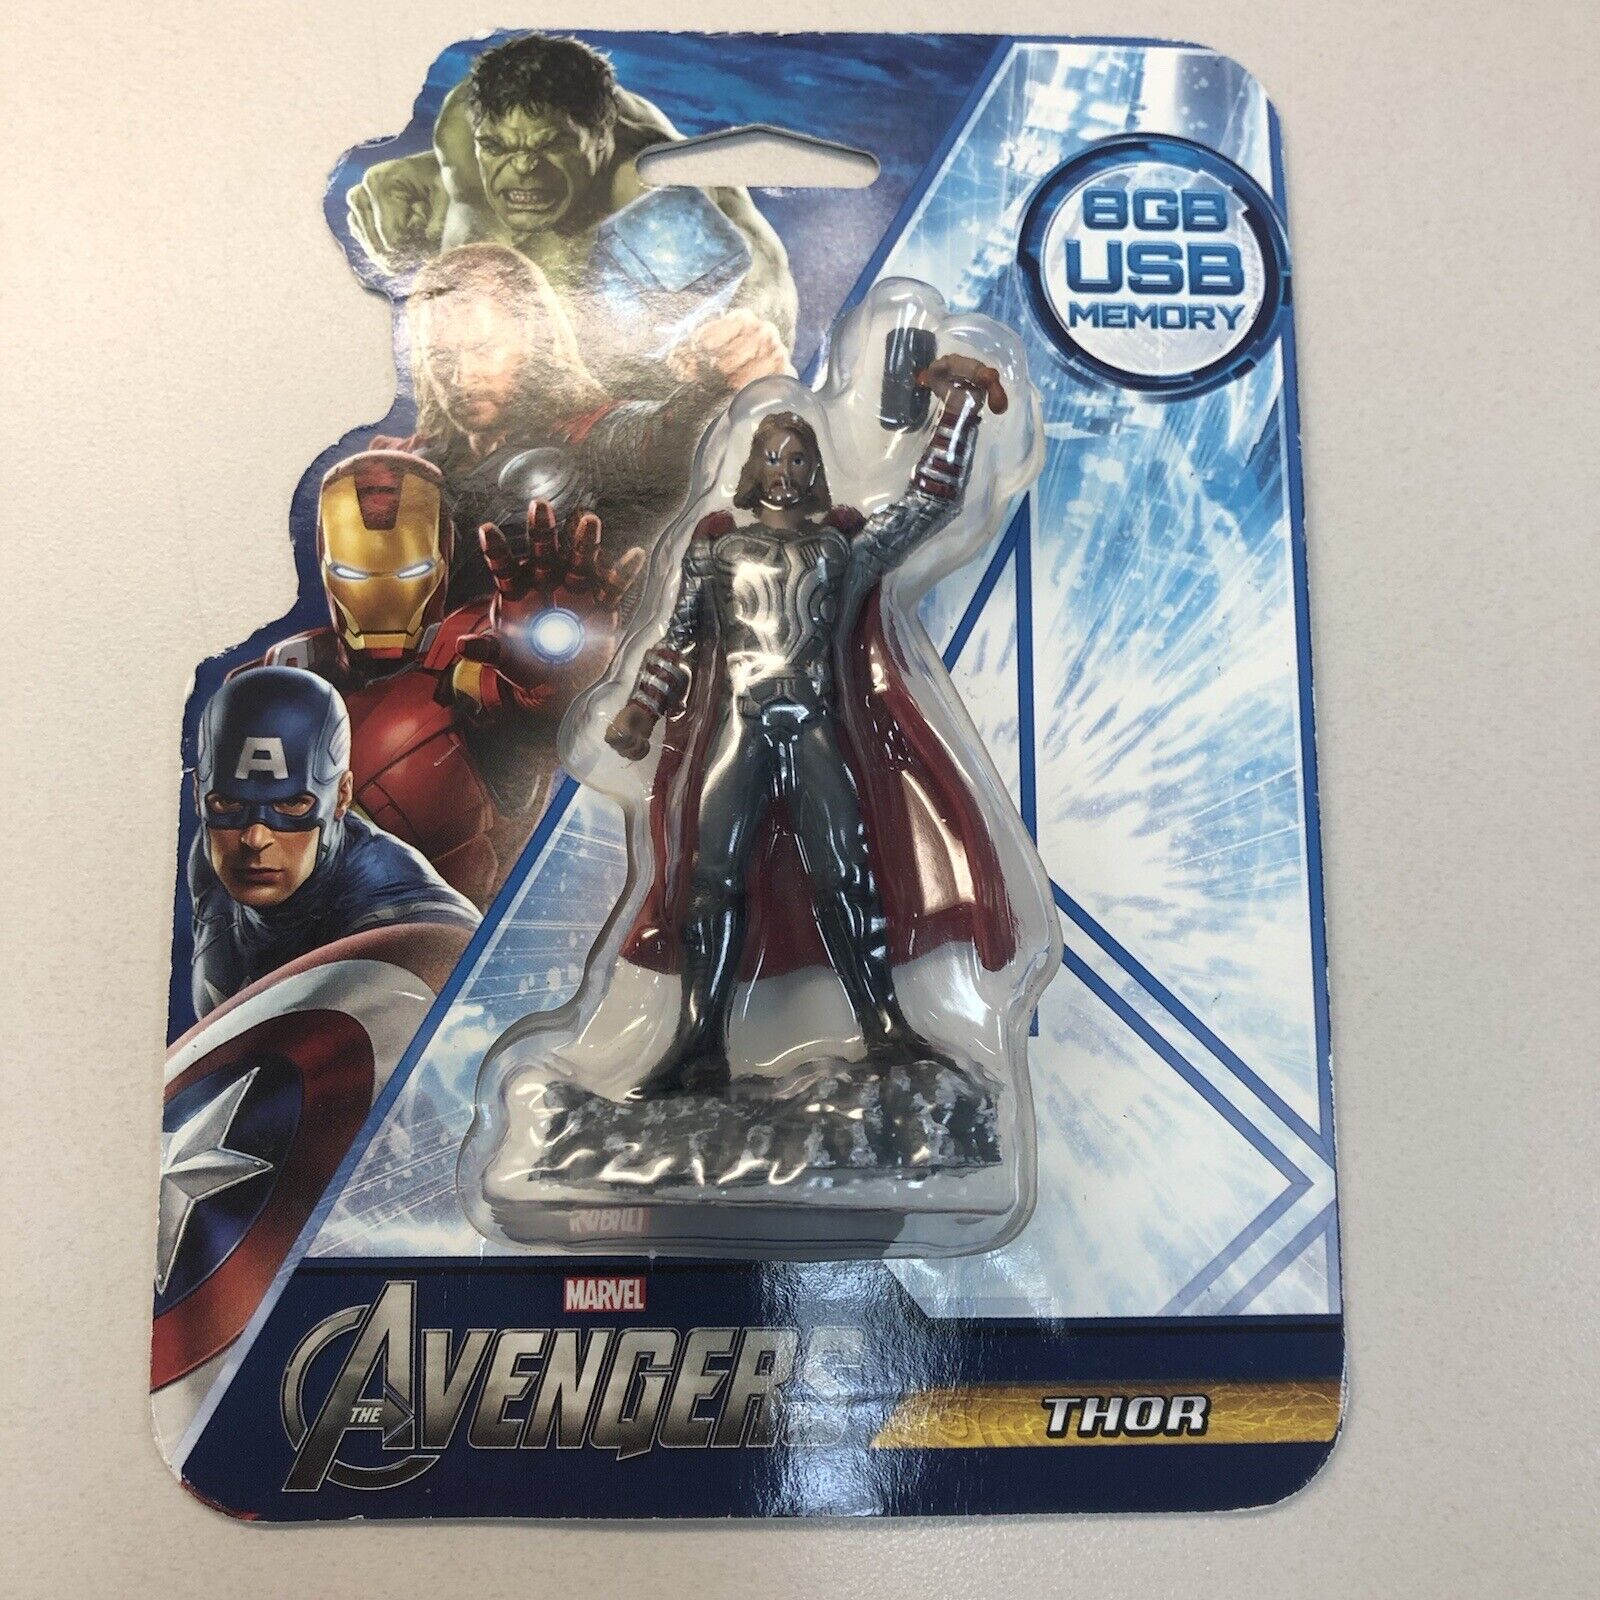 Thor 8 GB USB Memory Flash Drive Marvels The Avengers Action Figure Thor New NOS